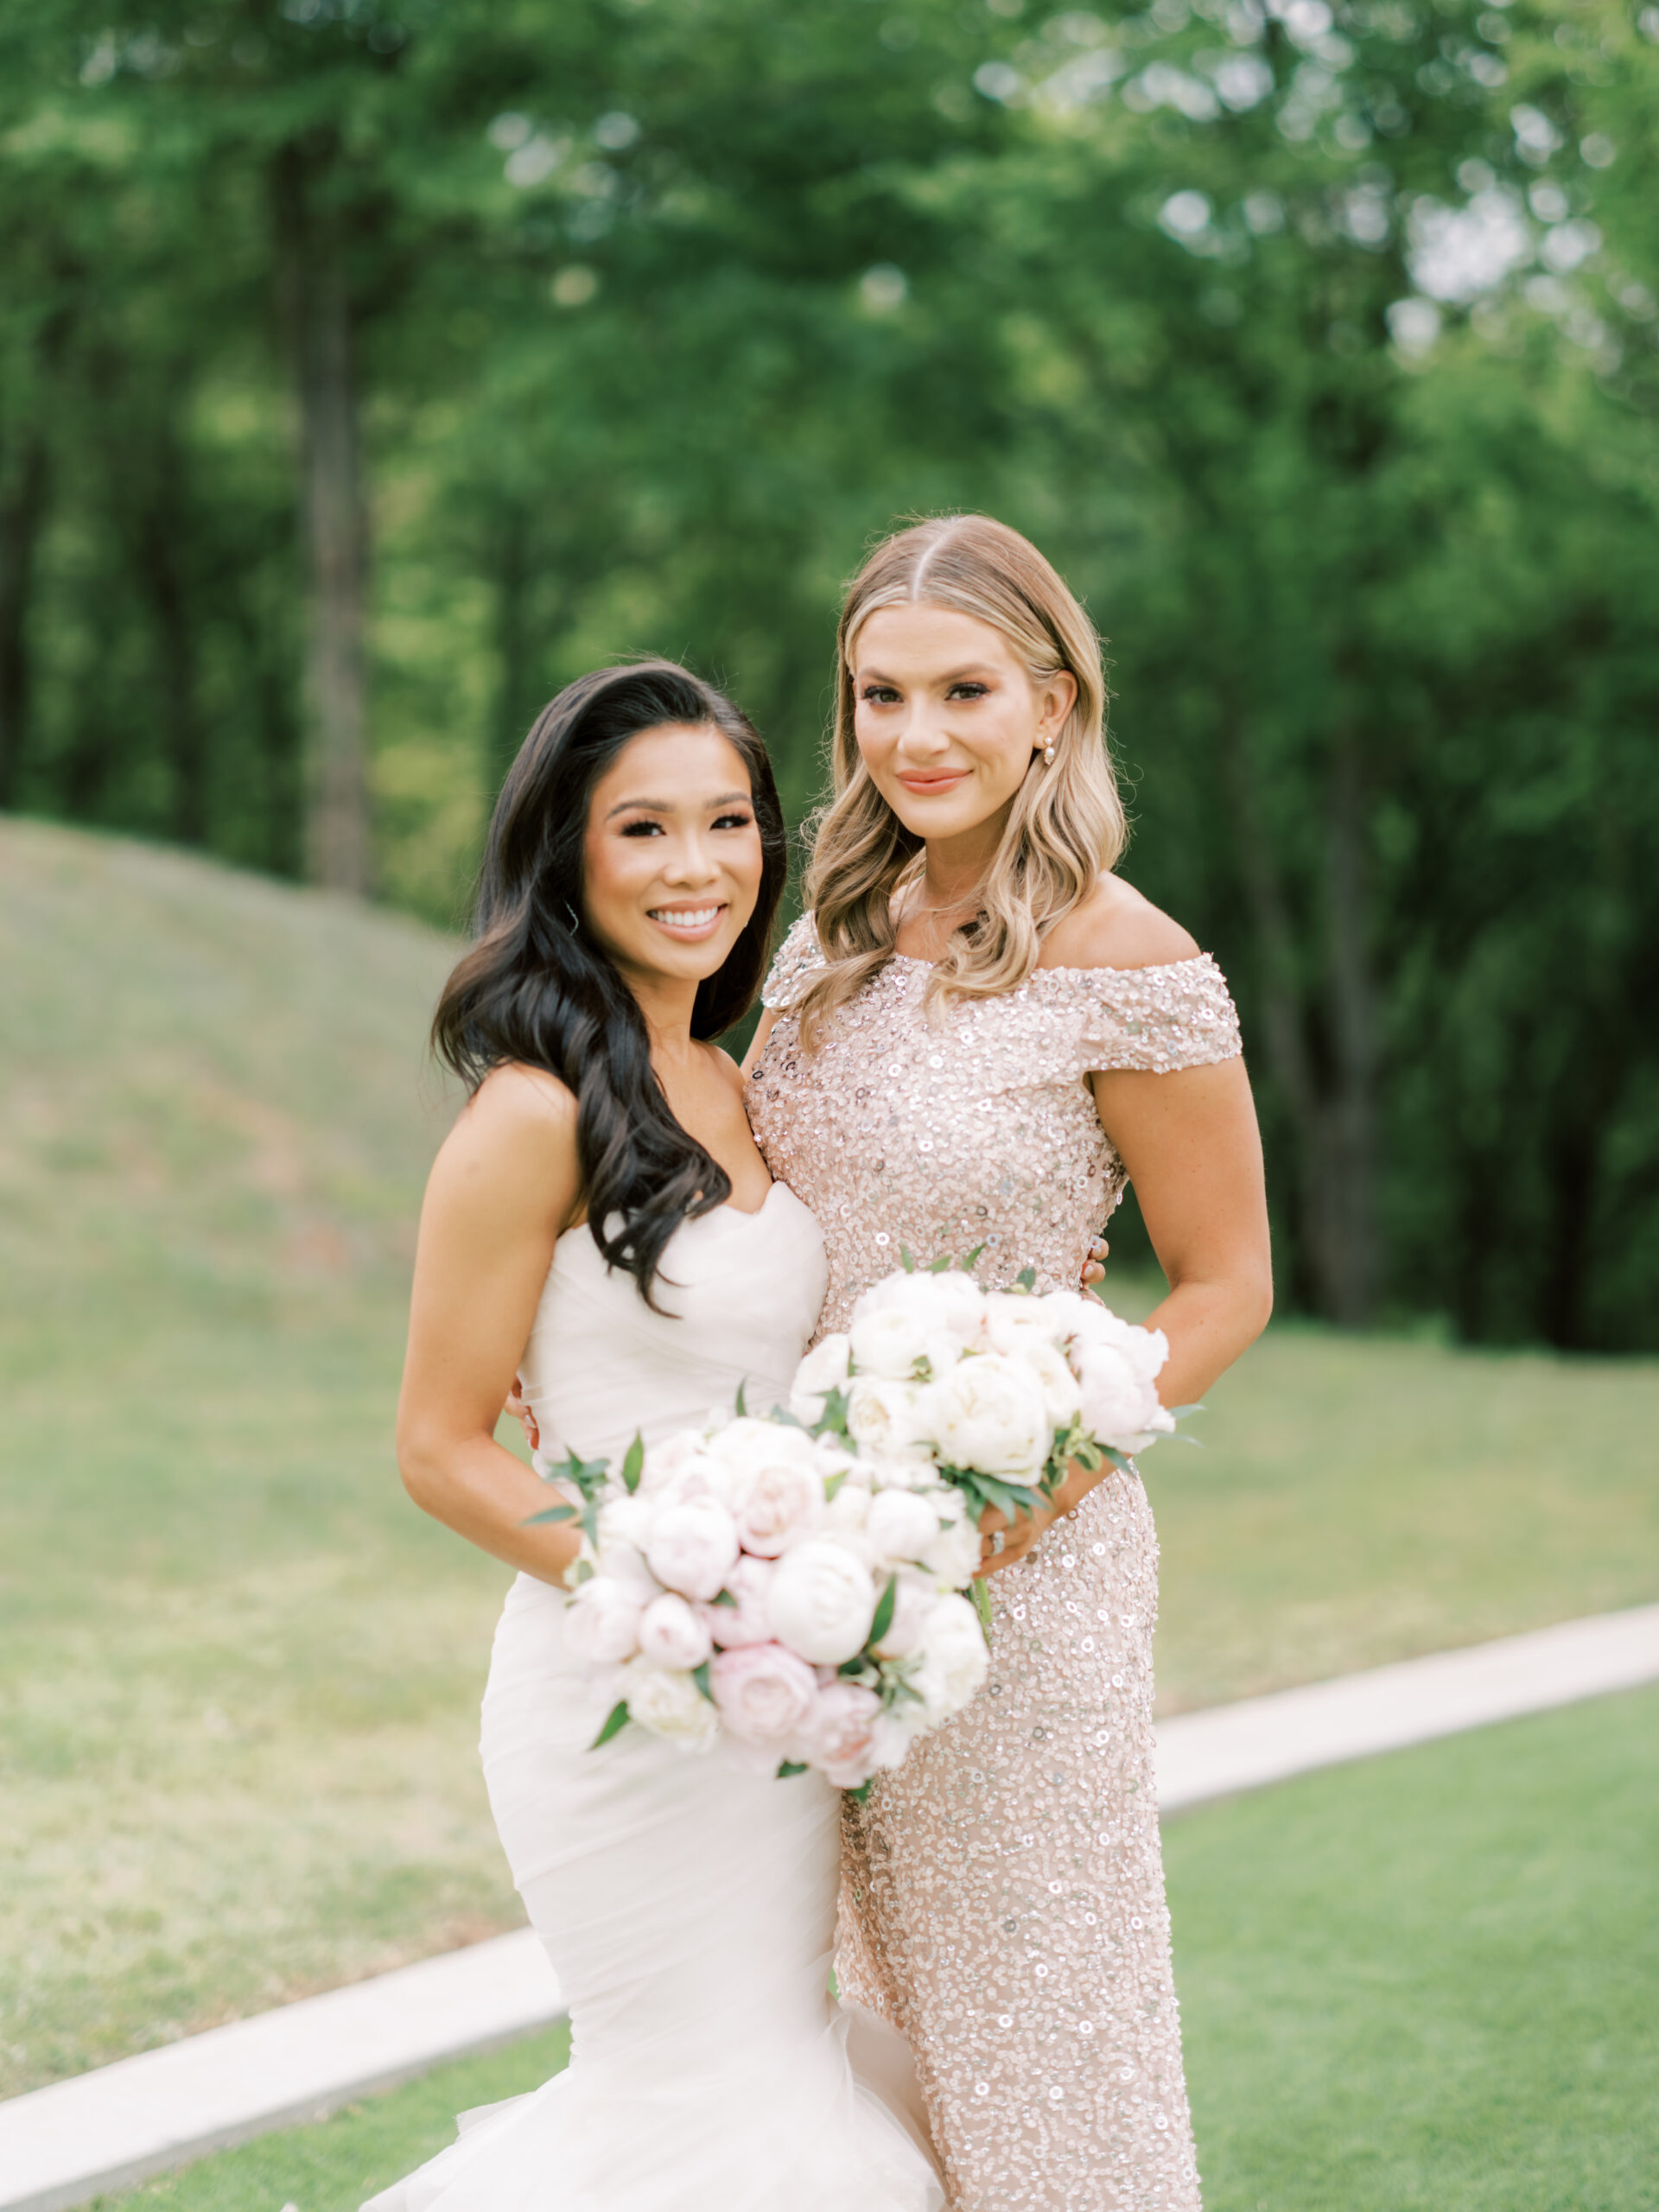 Hoang-Kim wearing a Vera Wang Gemma mermaid gown with her bridesmaid, Sarah Rose Summer wearing an Adriana Papell off-the-shoulder gown and olive + piper earrings